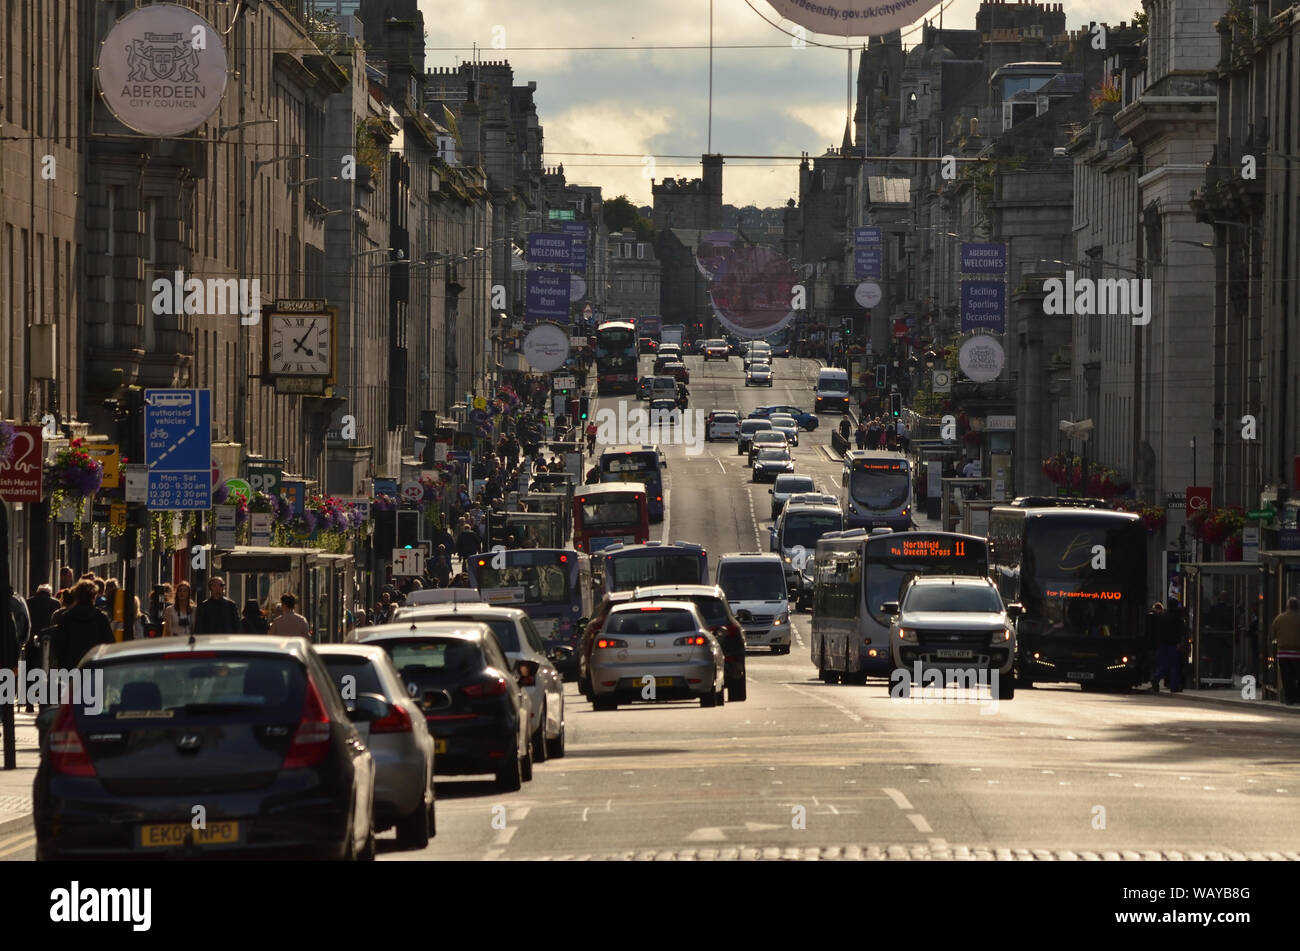 A typical busy British 'high street' scene in 2019 with shoppers and traffic on Union Street in Aberdeen city centre, Scotland. Stock Photo